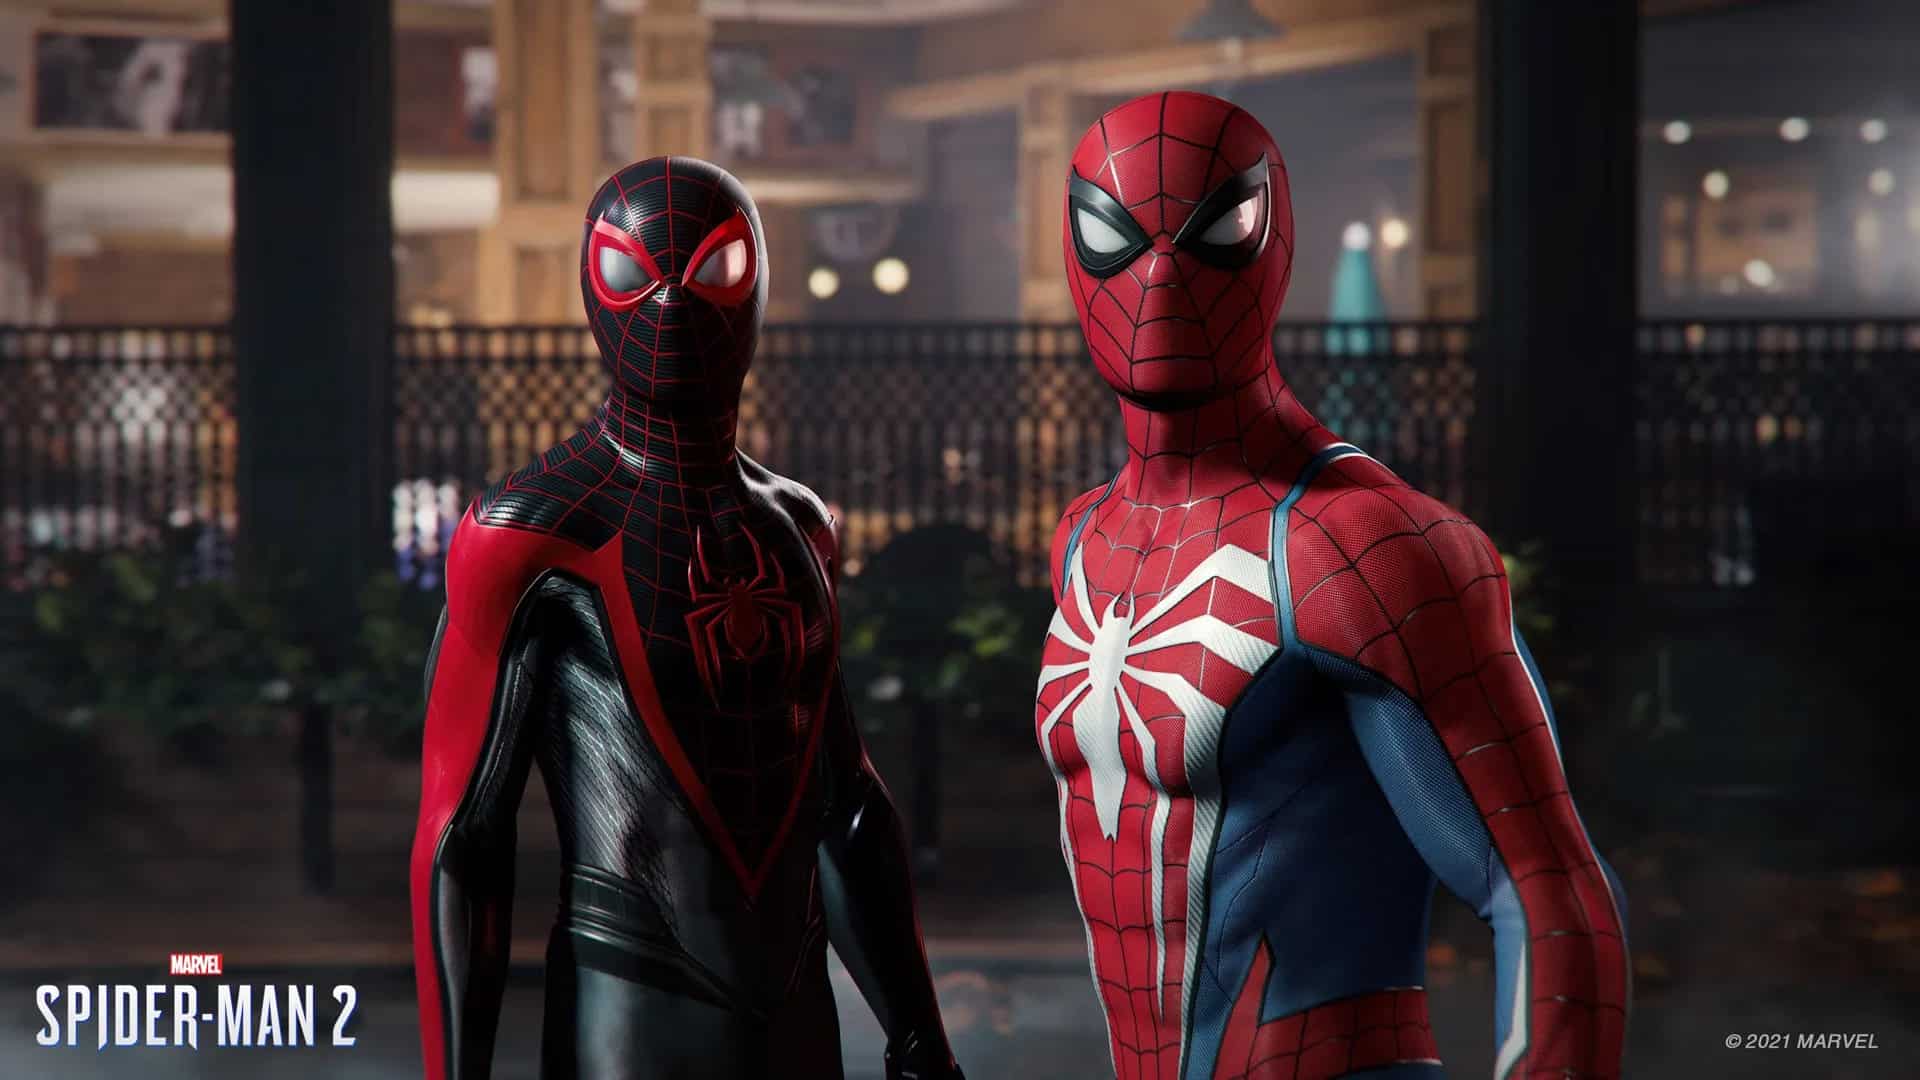 Marvel’s Spider-Man 2 is officially announced for 2023 and will feature Venom